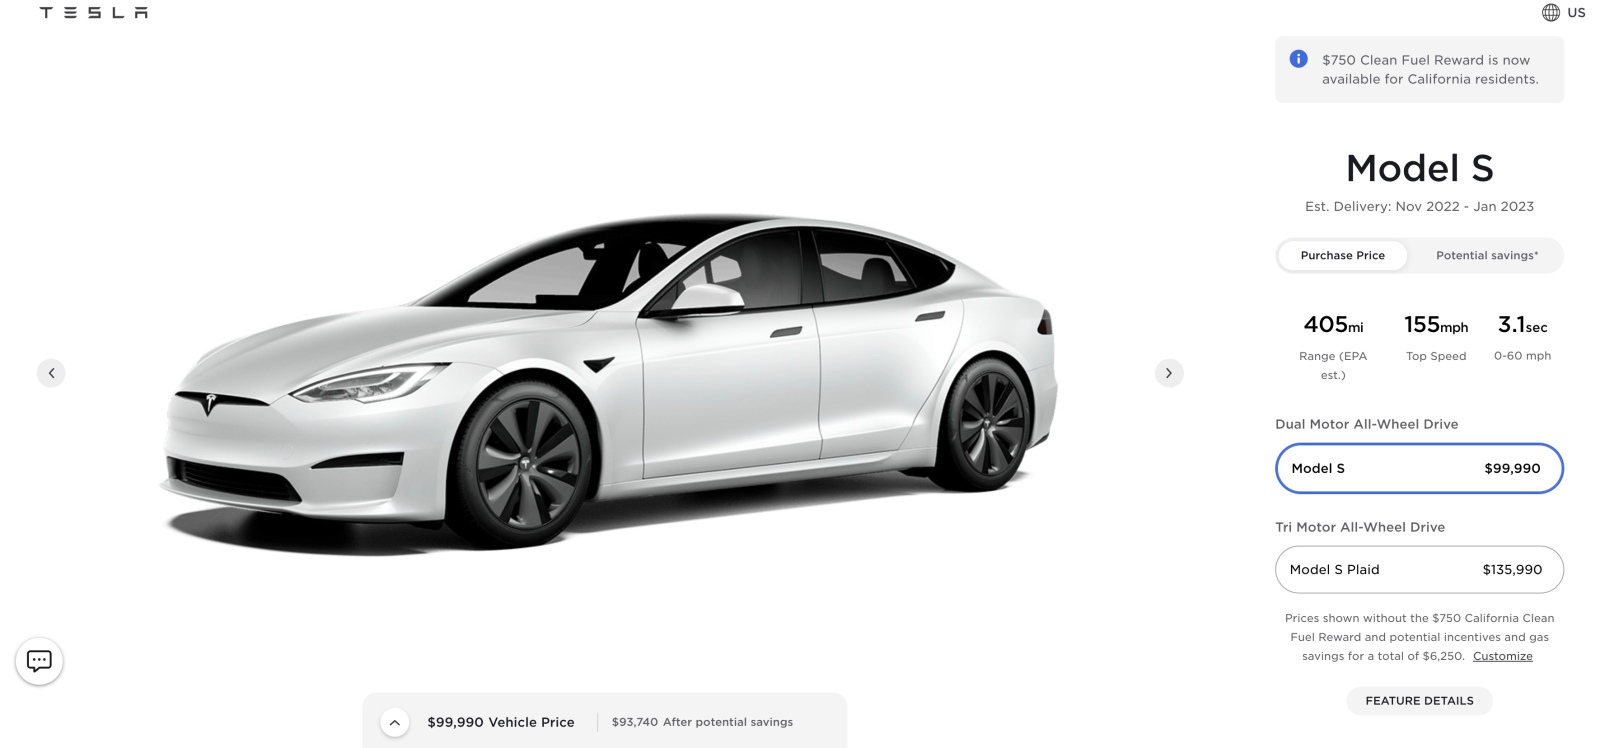 Model S Delivery - Delivery dates for several Tesla new order got pushed into 2023